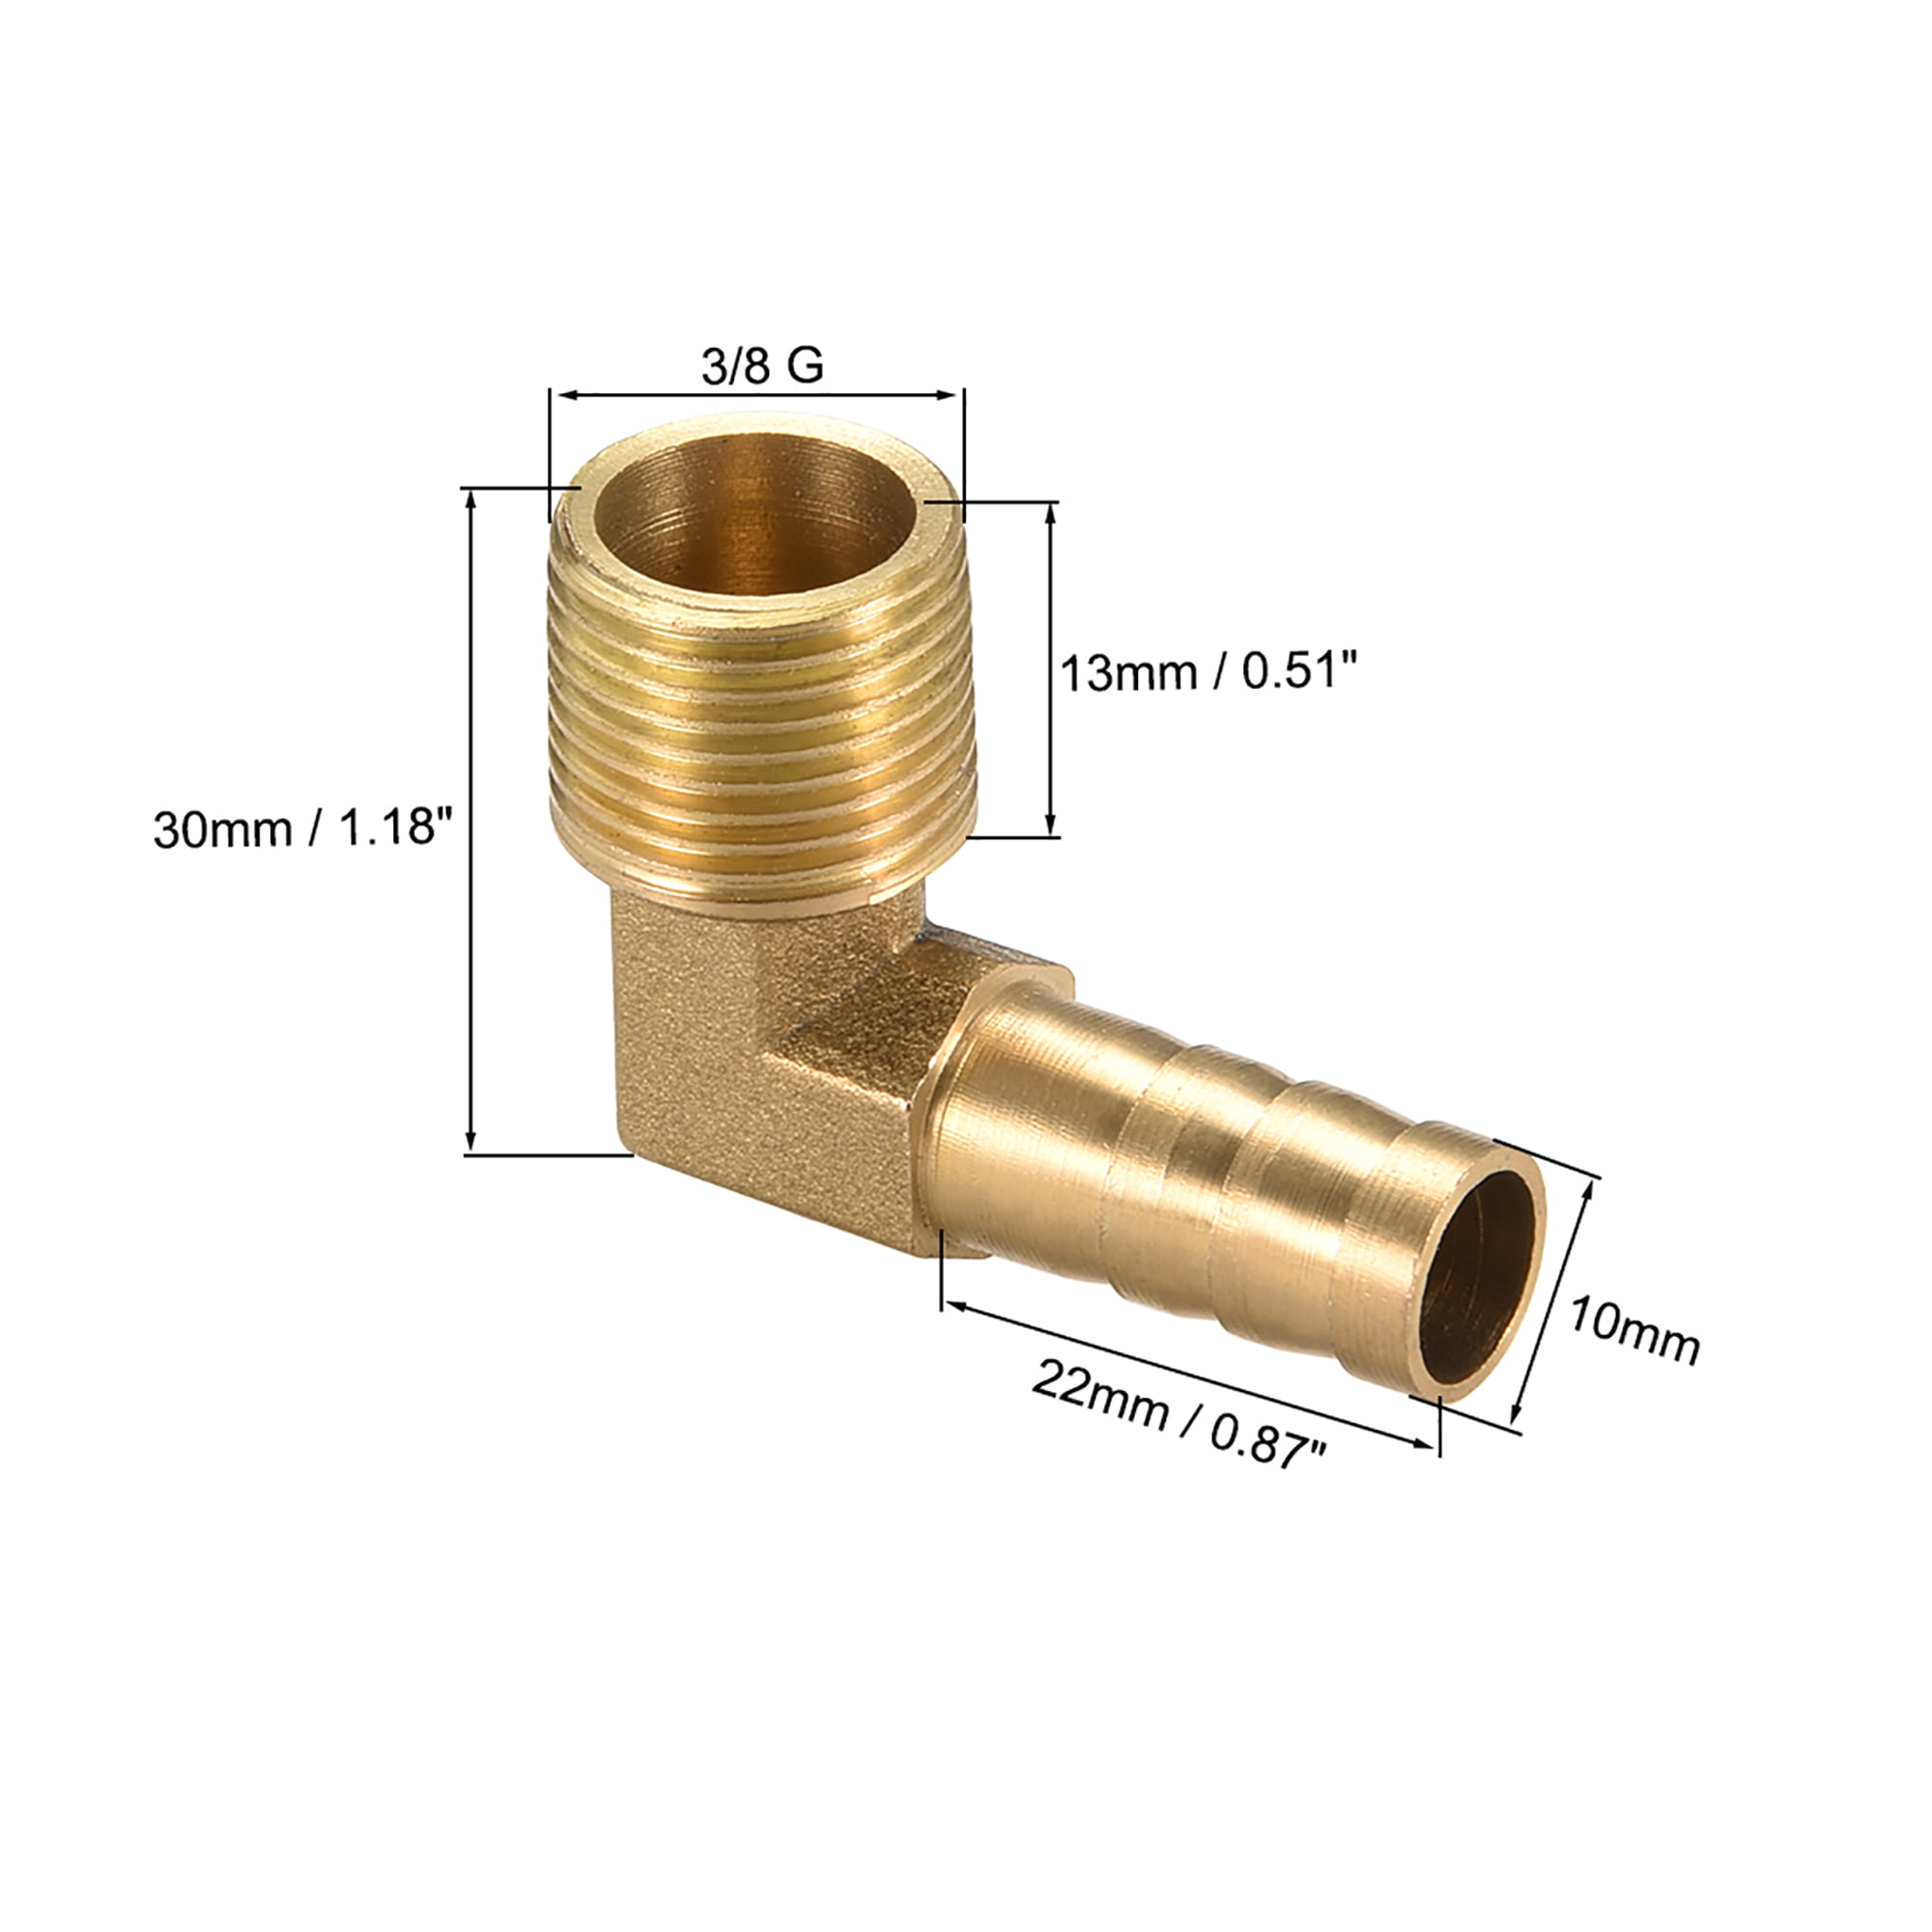 10mm 1, 3/8 New Hose ID/Hose Barb 90 Degree L Right Angle Elbow Union Brass Fitting Water/Fuel/Air 